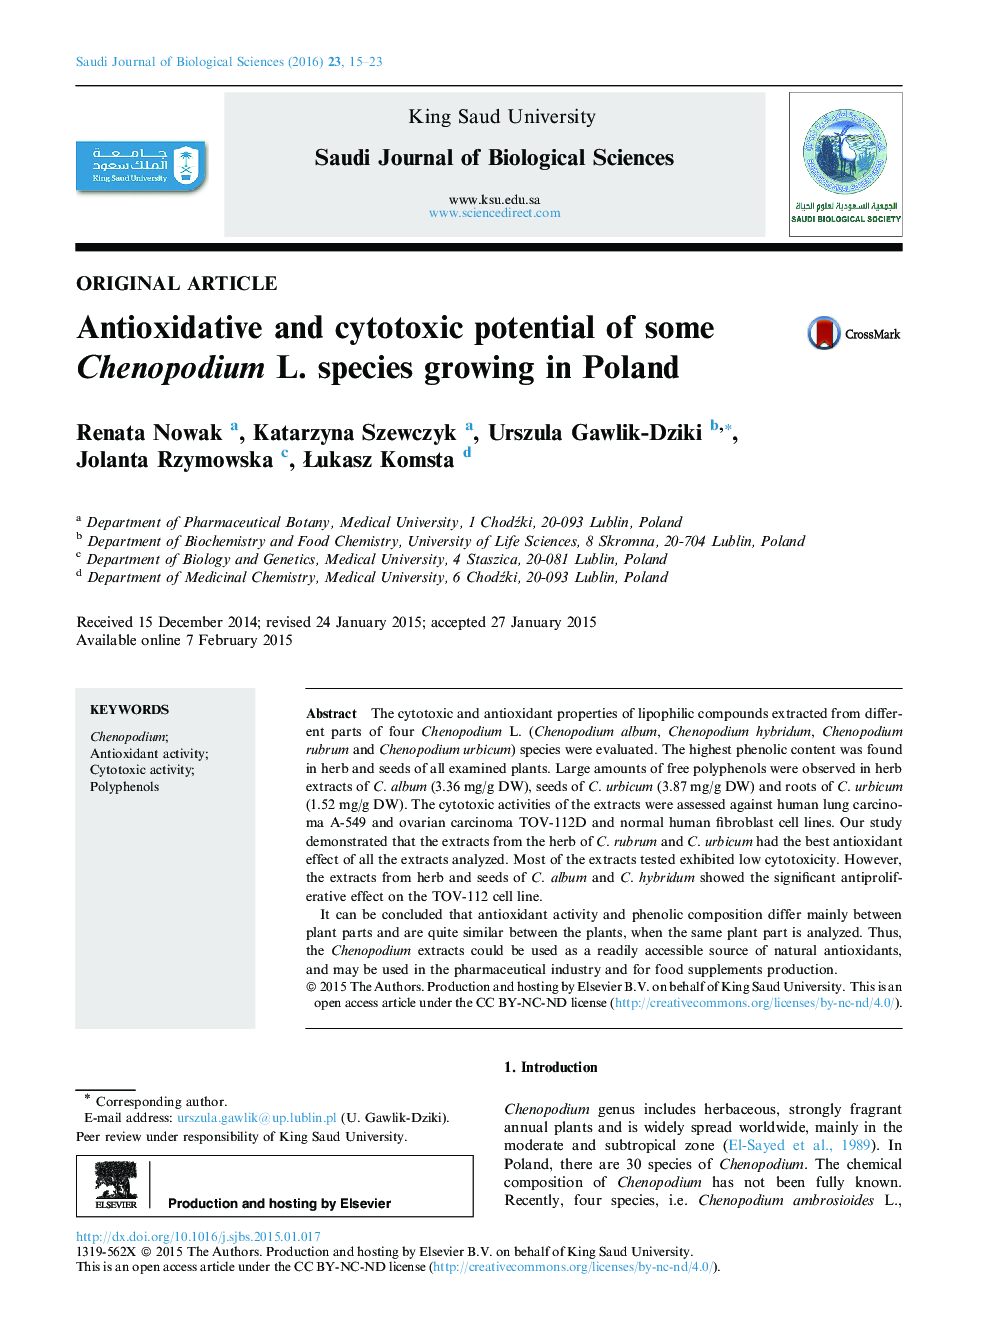 Antioxidative and cytotoxic potential of some Chenopodium L. species growing in Poland 